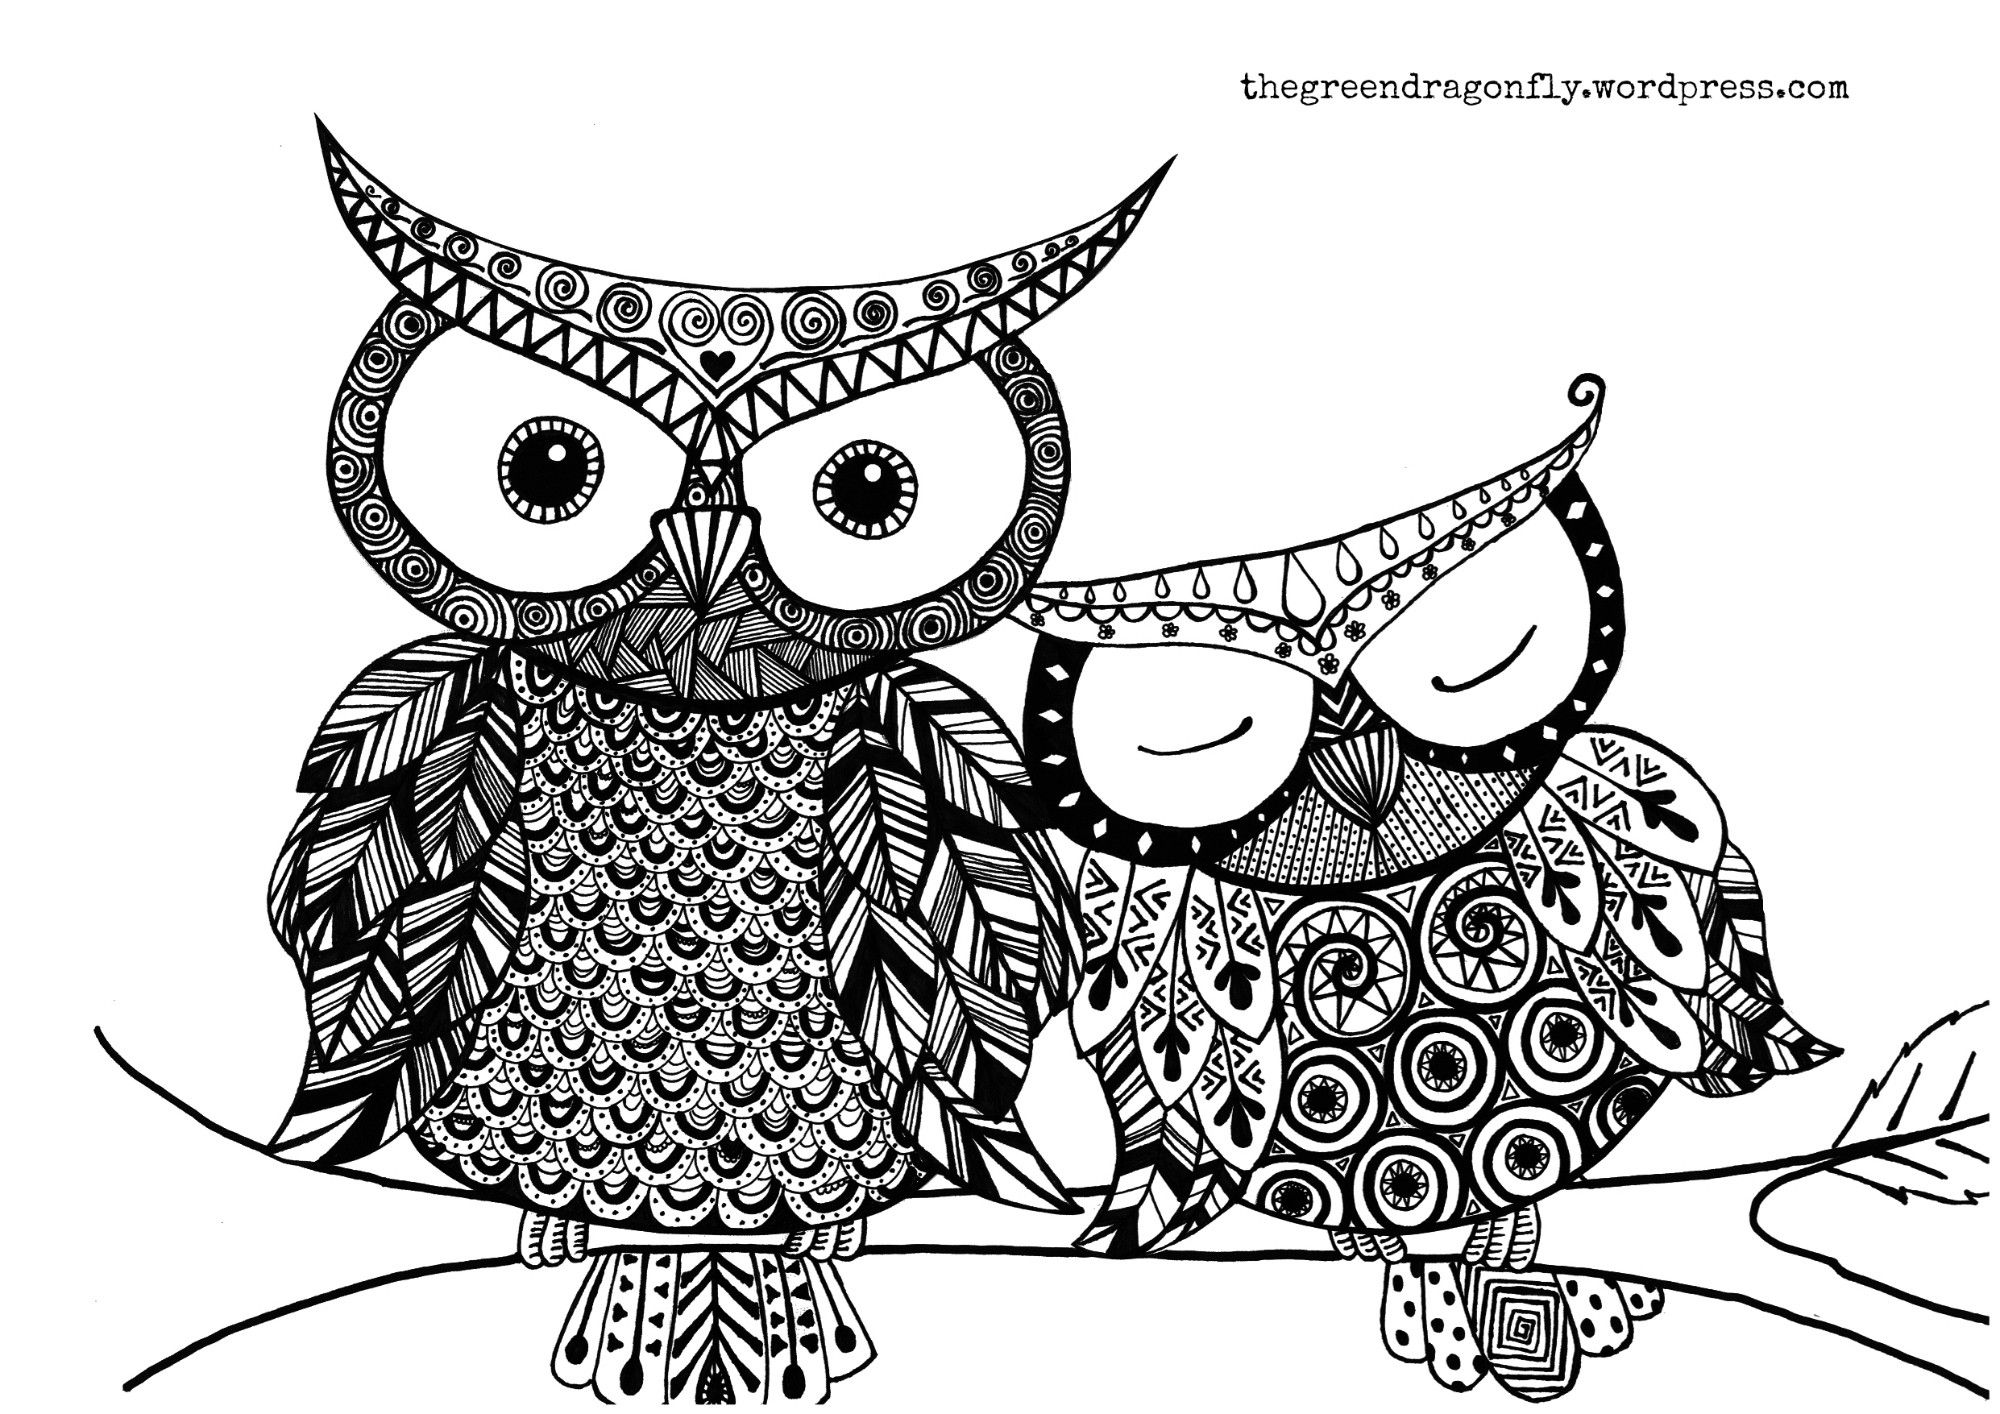 Owl Adult Coloring Pages
 Owl coloring page – The Green Dragonfly